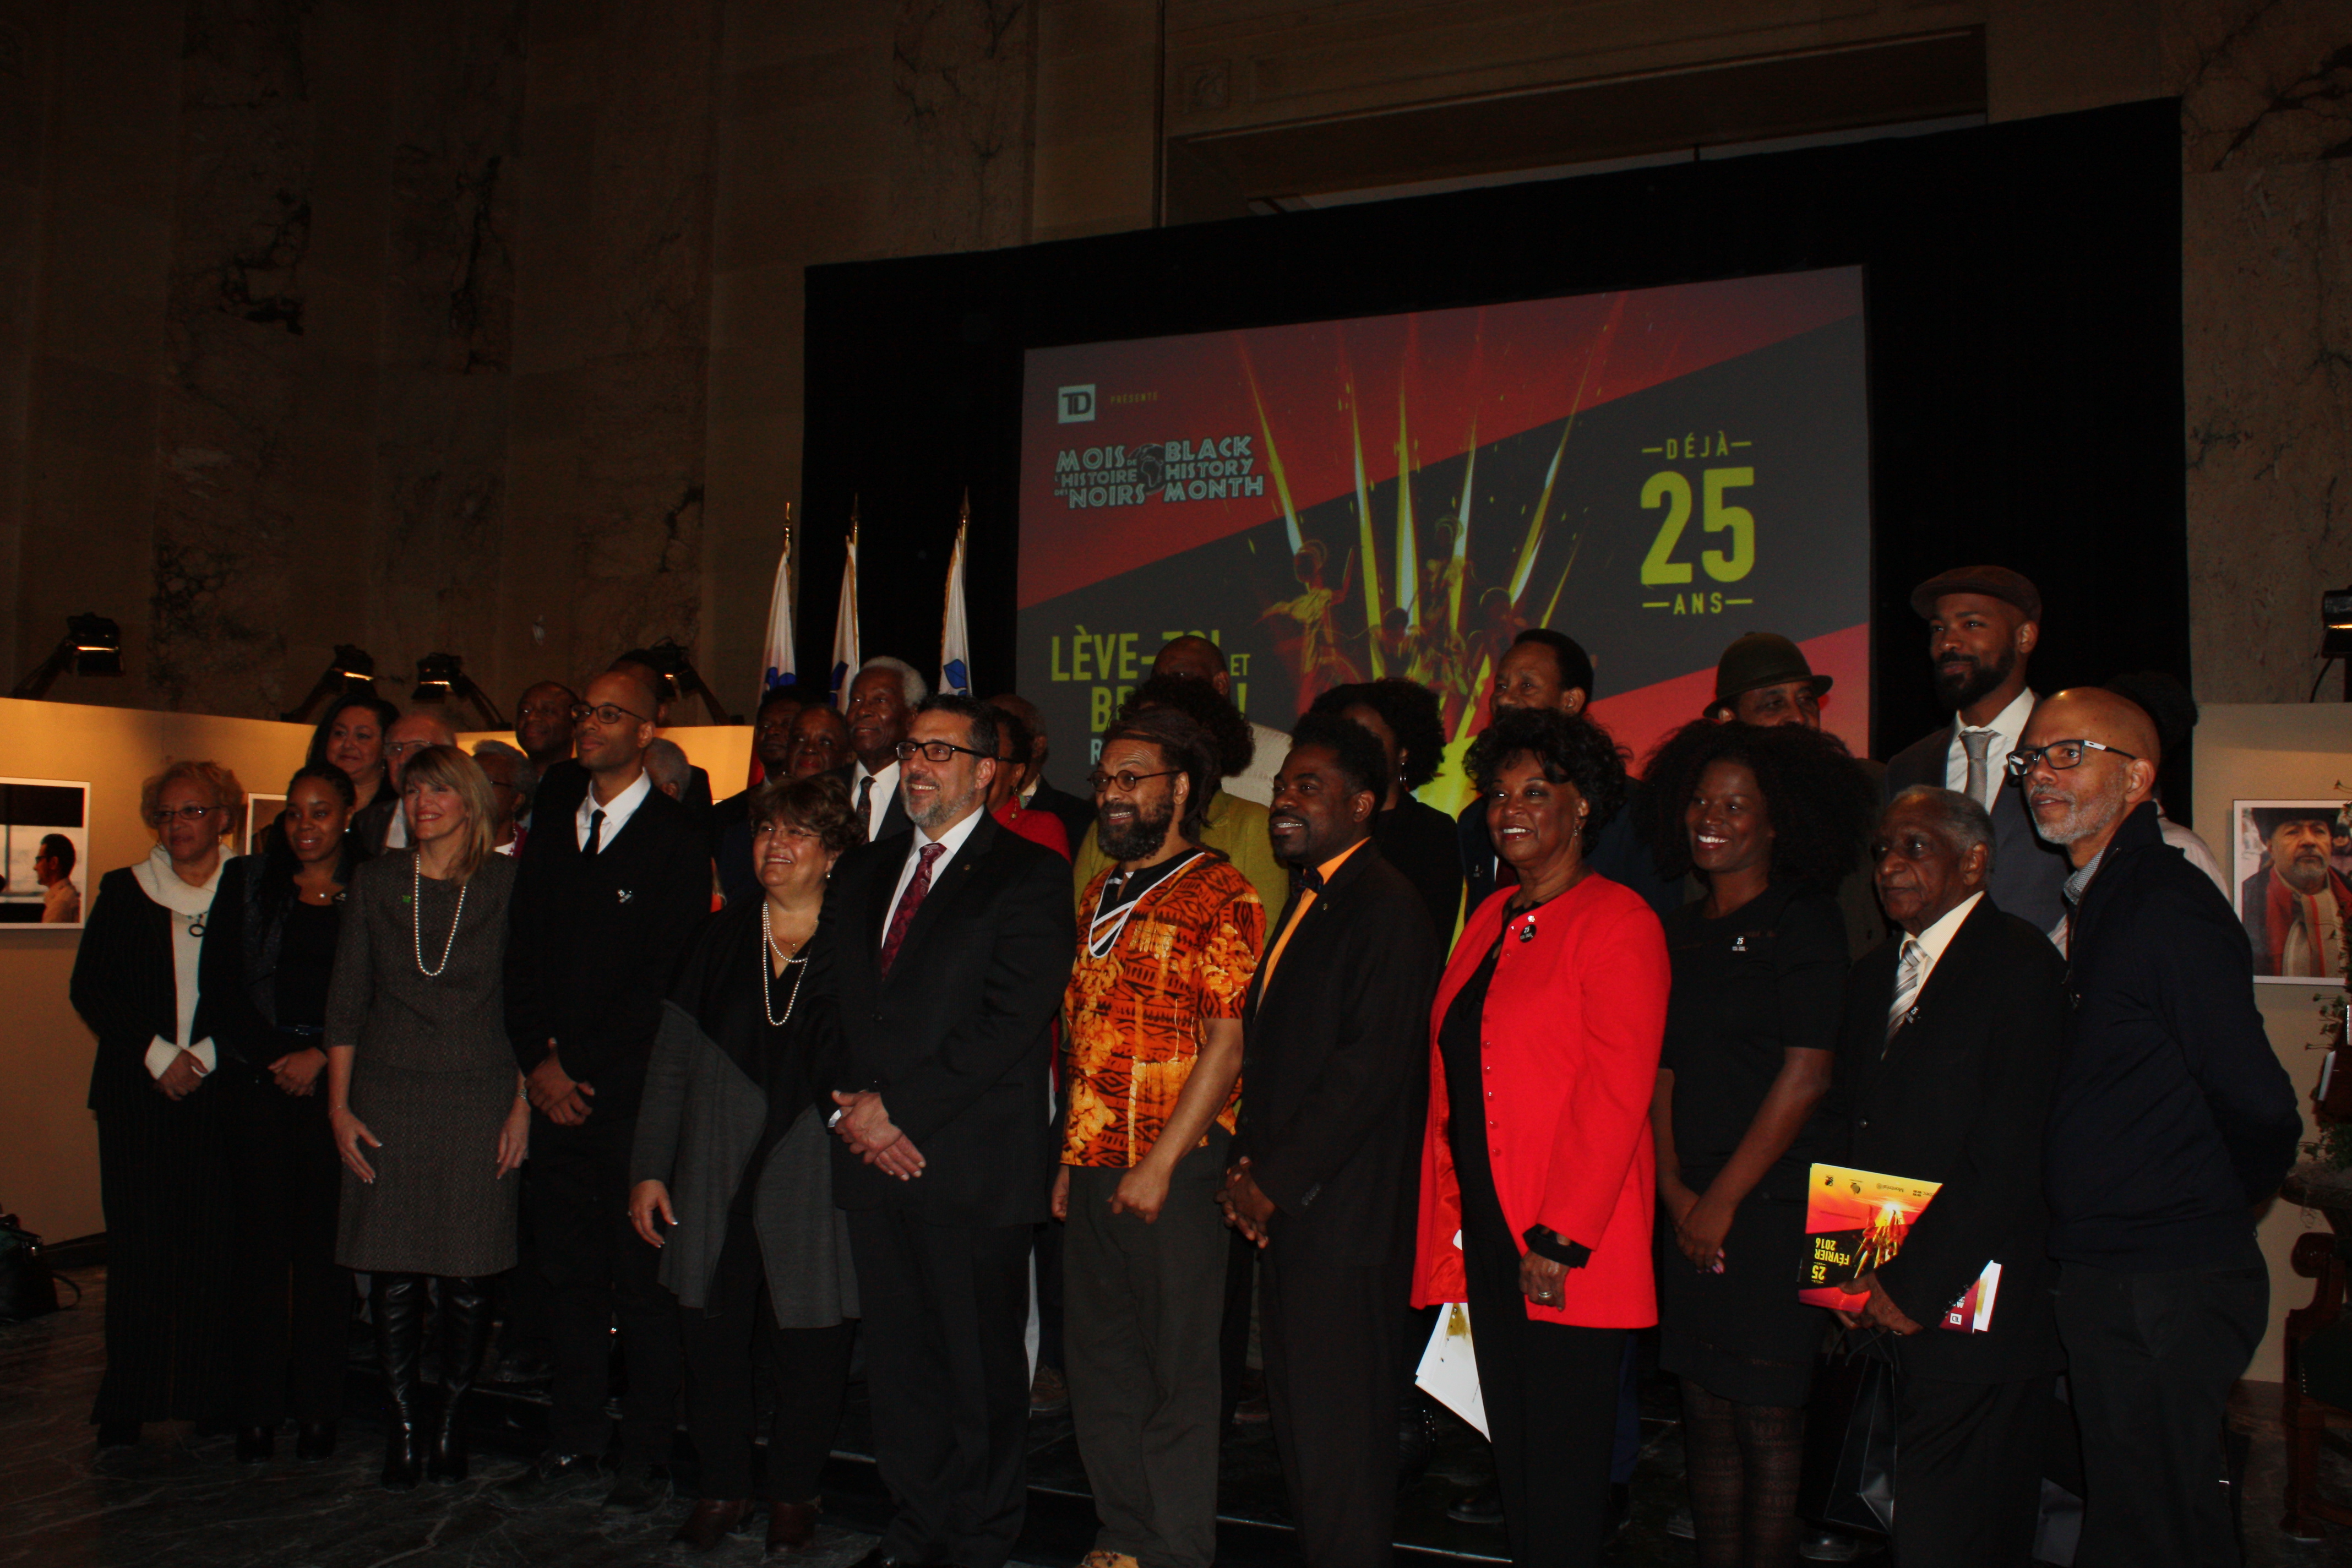 The directive team of the Black History Month, their laureates and partners gather for the 25th anniversary the event's Conference at the City Hall of Montréal on Tuesday 19th, 2016. Photo by Ambre Sachet.